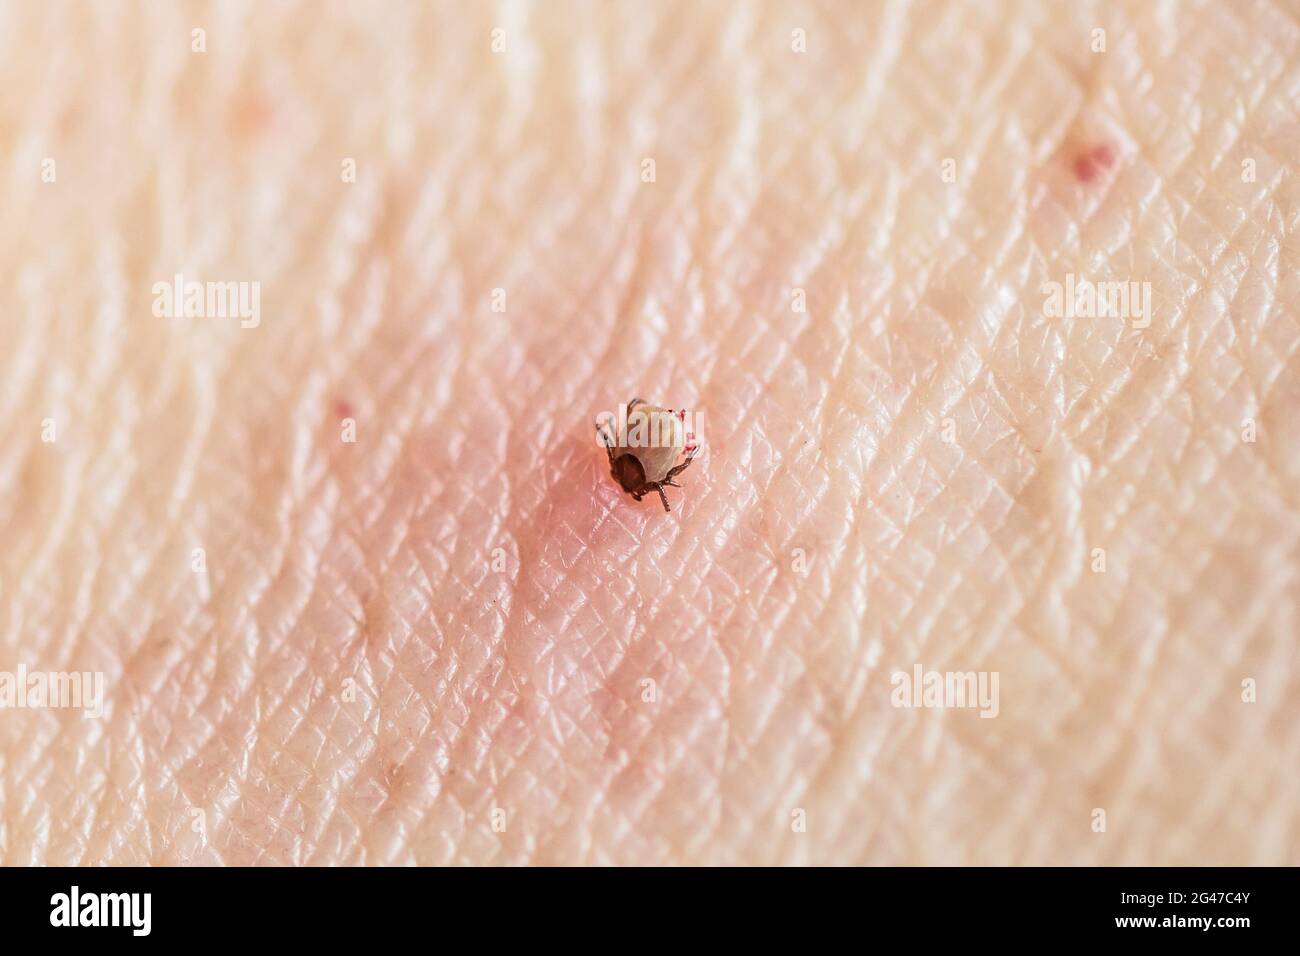 Engorged, feeding adult female deer tick, Ixodes scapularis, laying red eggs, protruding under it's body, sucking blood from skin of human female. Stock Photo